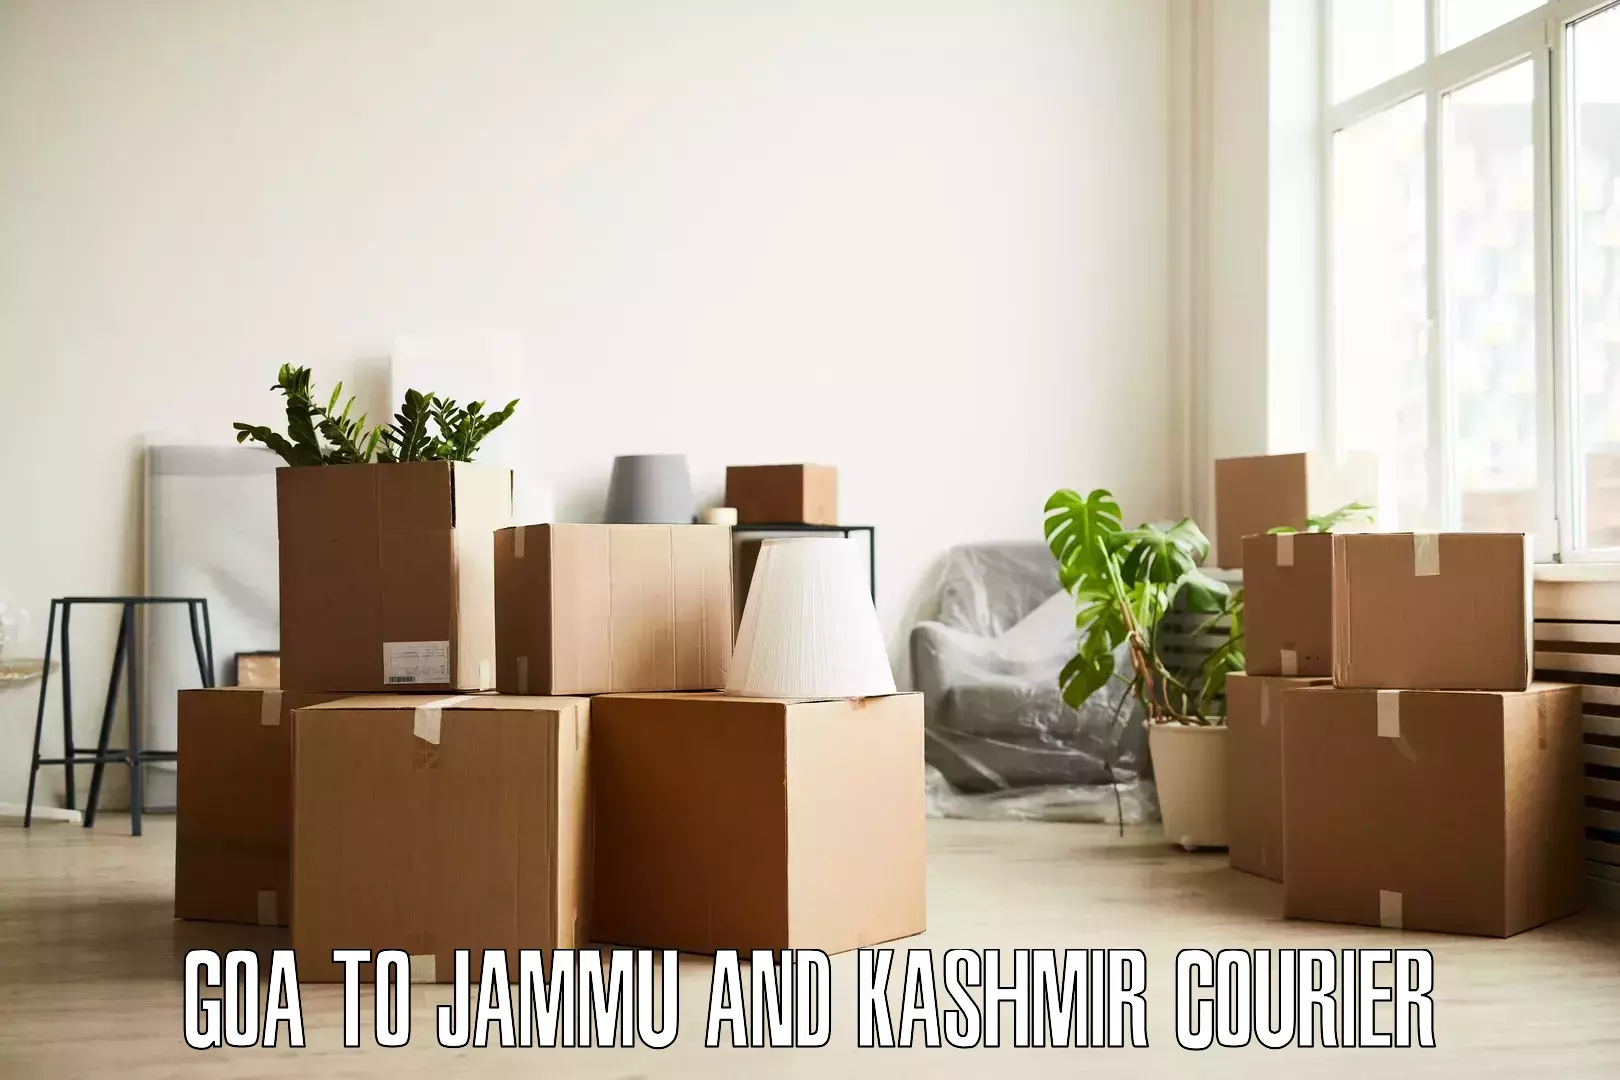 Furniture transport specialists Goa to Pulwama